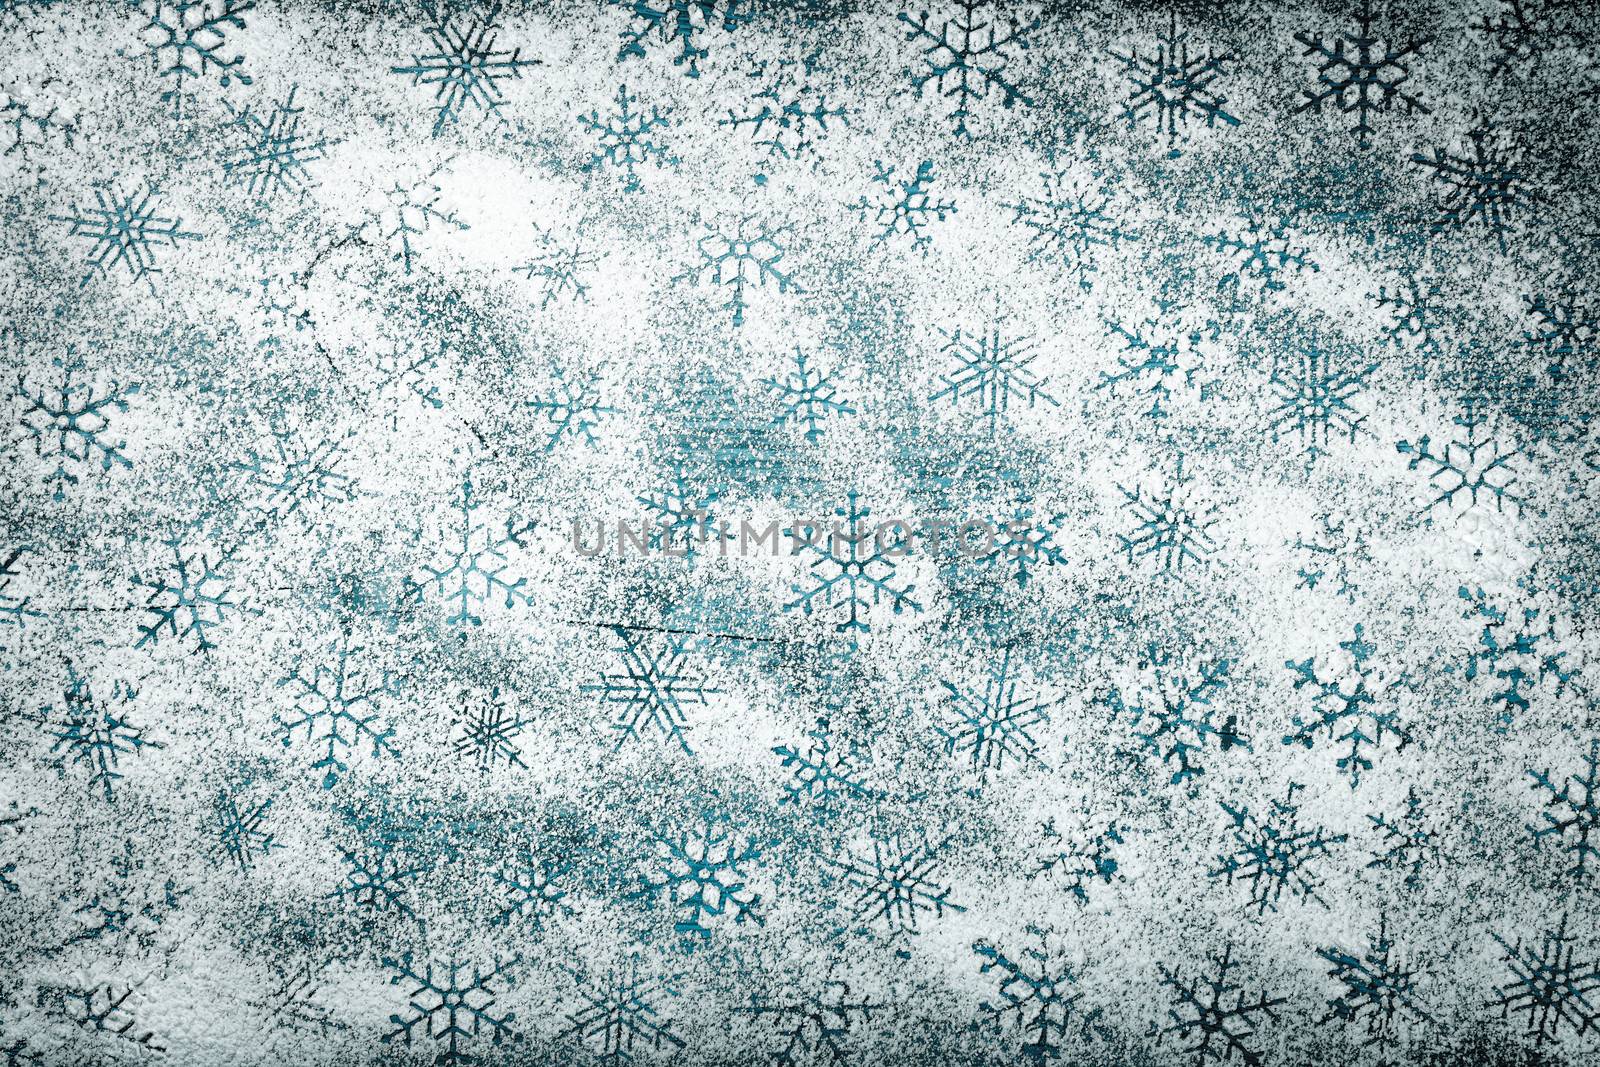 Snowflakes background for Christmas. Snowflake pattern made of icing sugar on wooden table. Top view